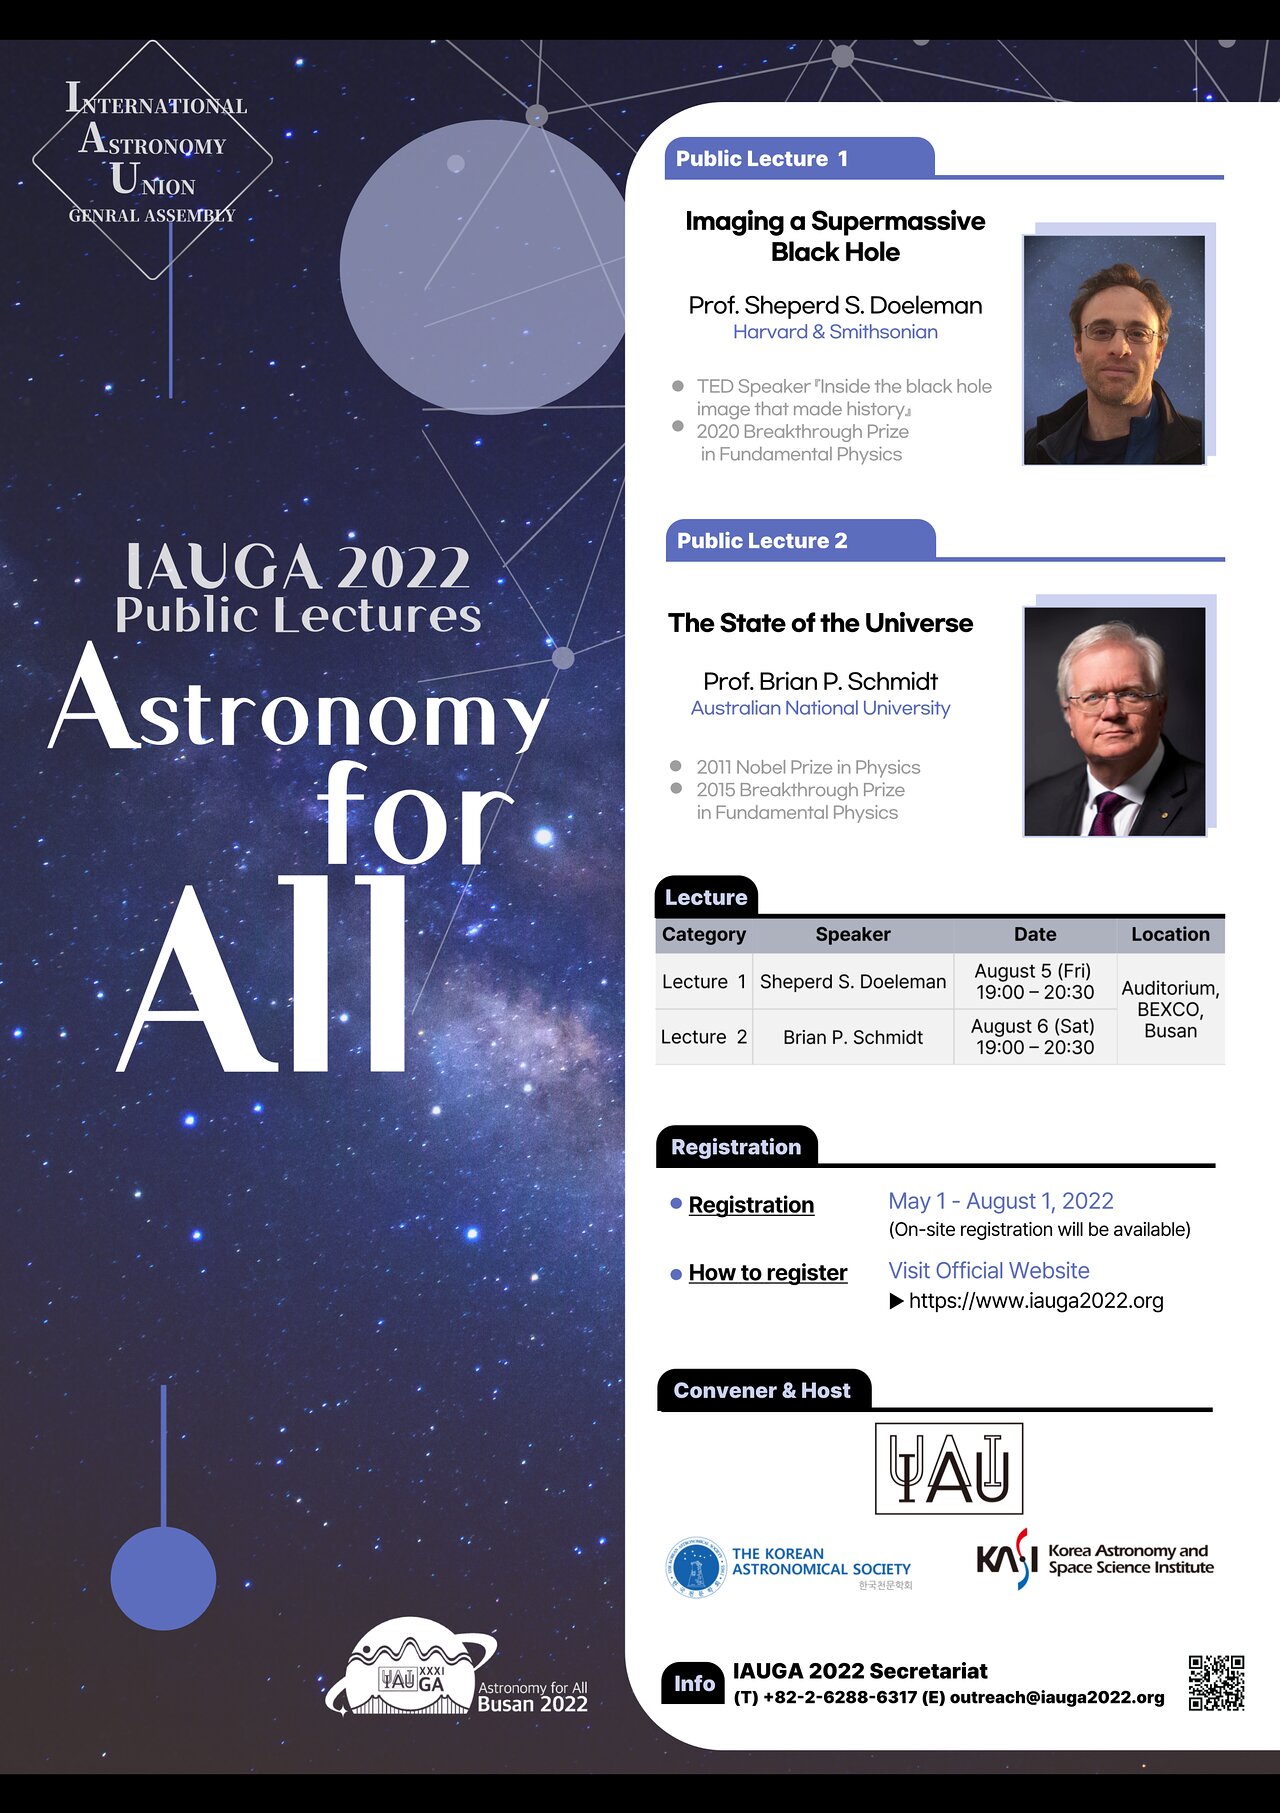 Public Lectures at the XXXI IAU General Assembly